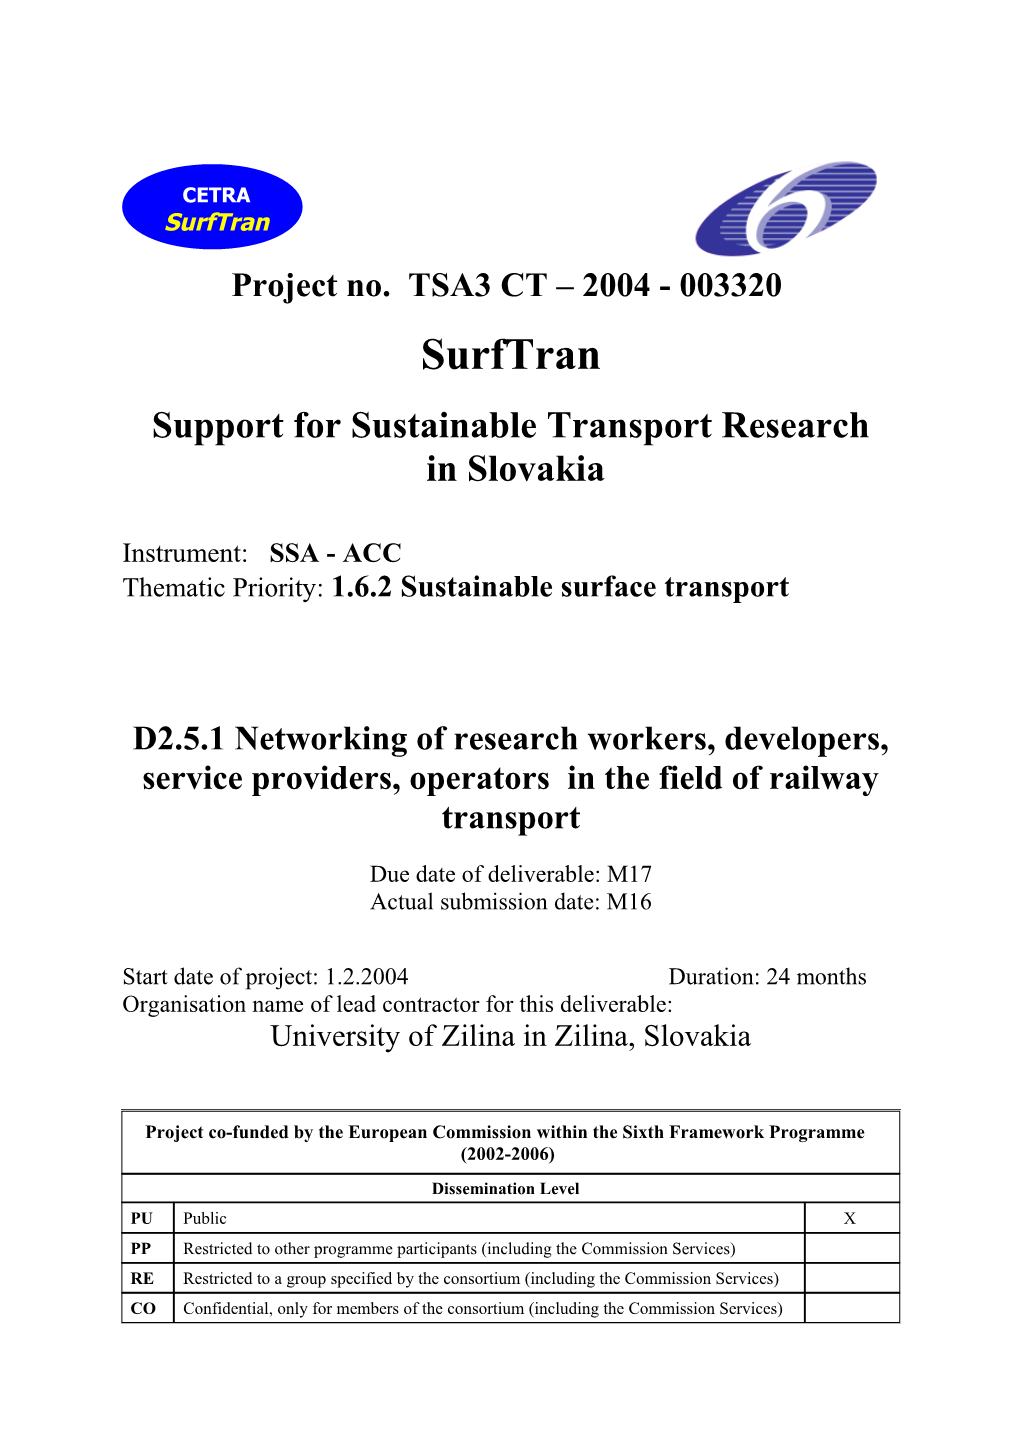 Support for Sustainable Transport Research